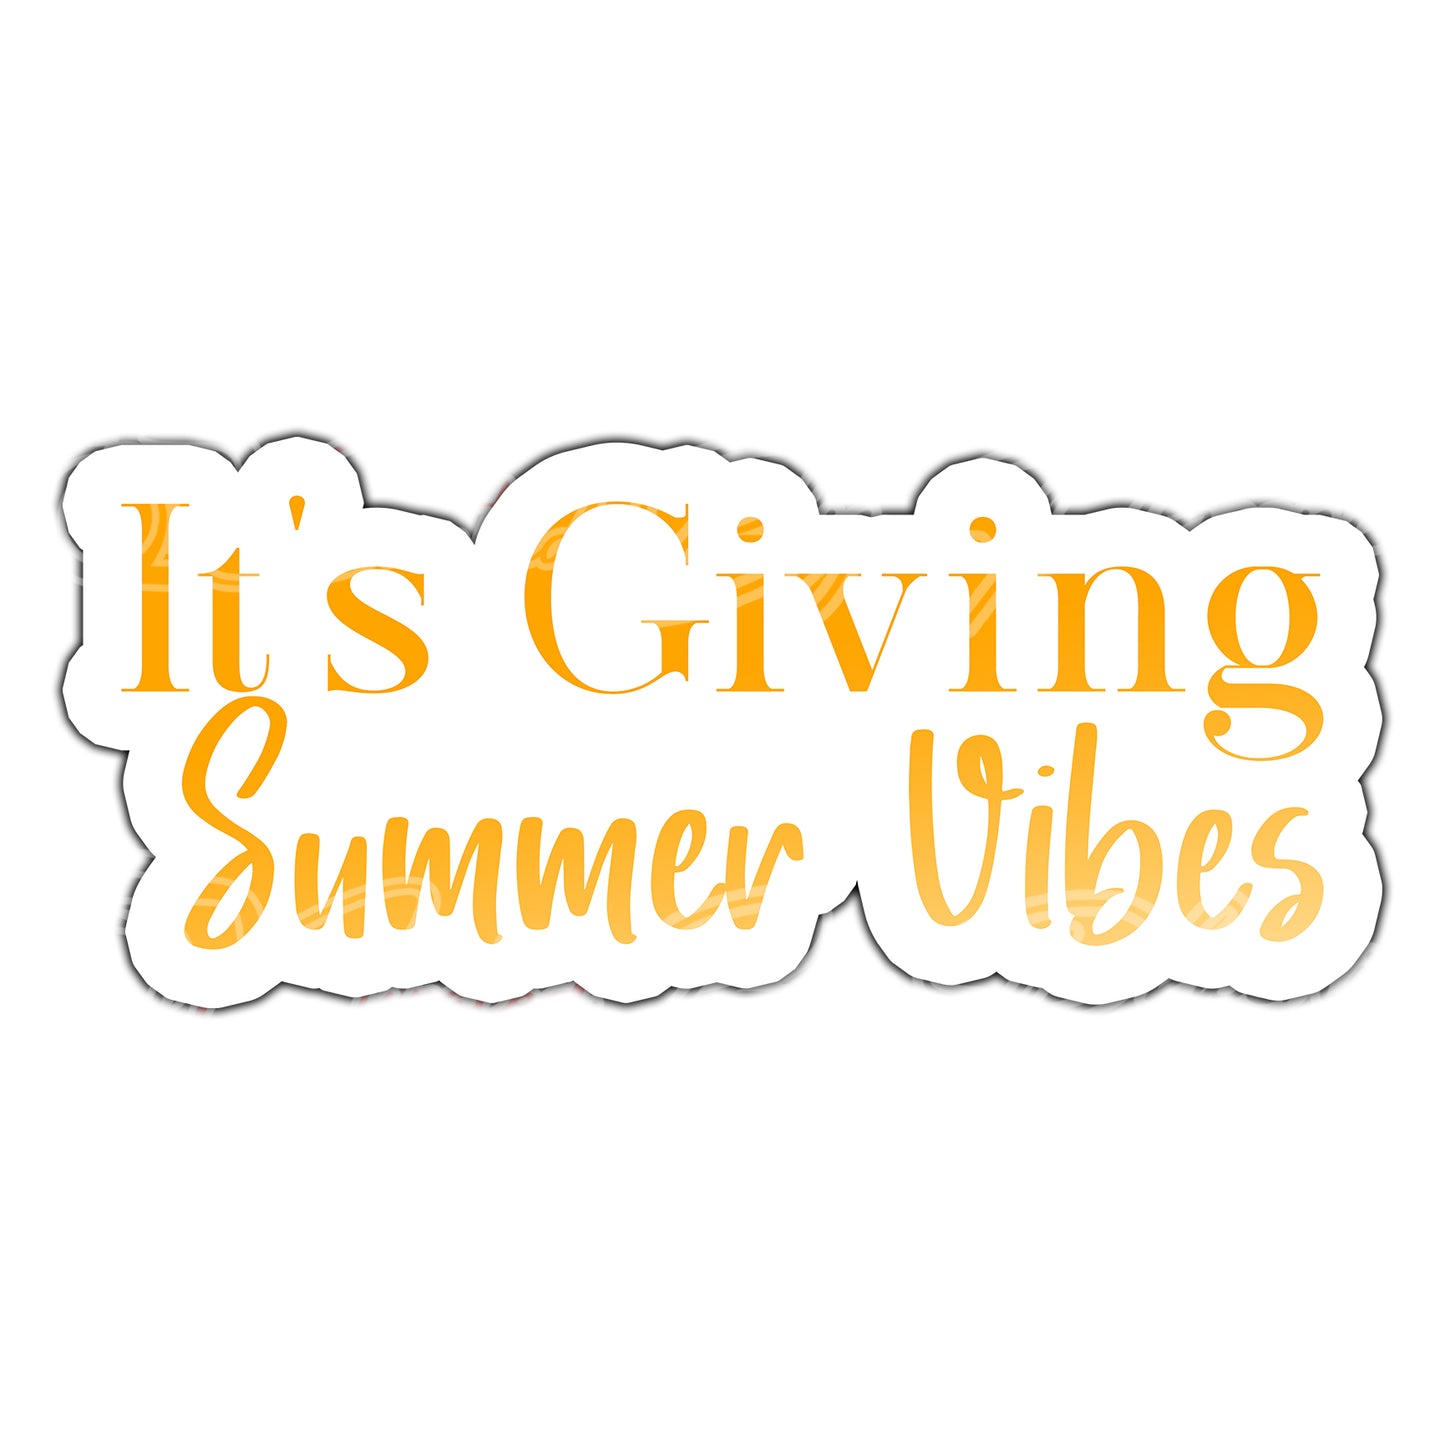 It's giving summer vibes prop-Summer photo booth props- summer props-photo booth props-custom props- custom prop signs-props -Curated by Phoenix 